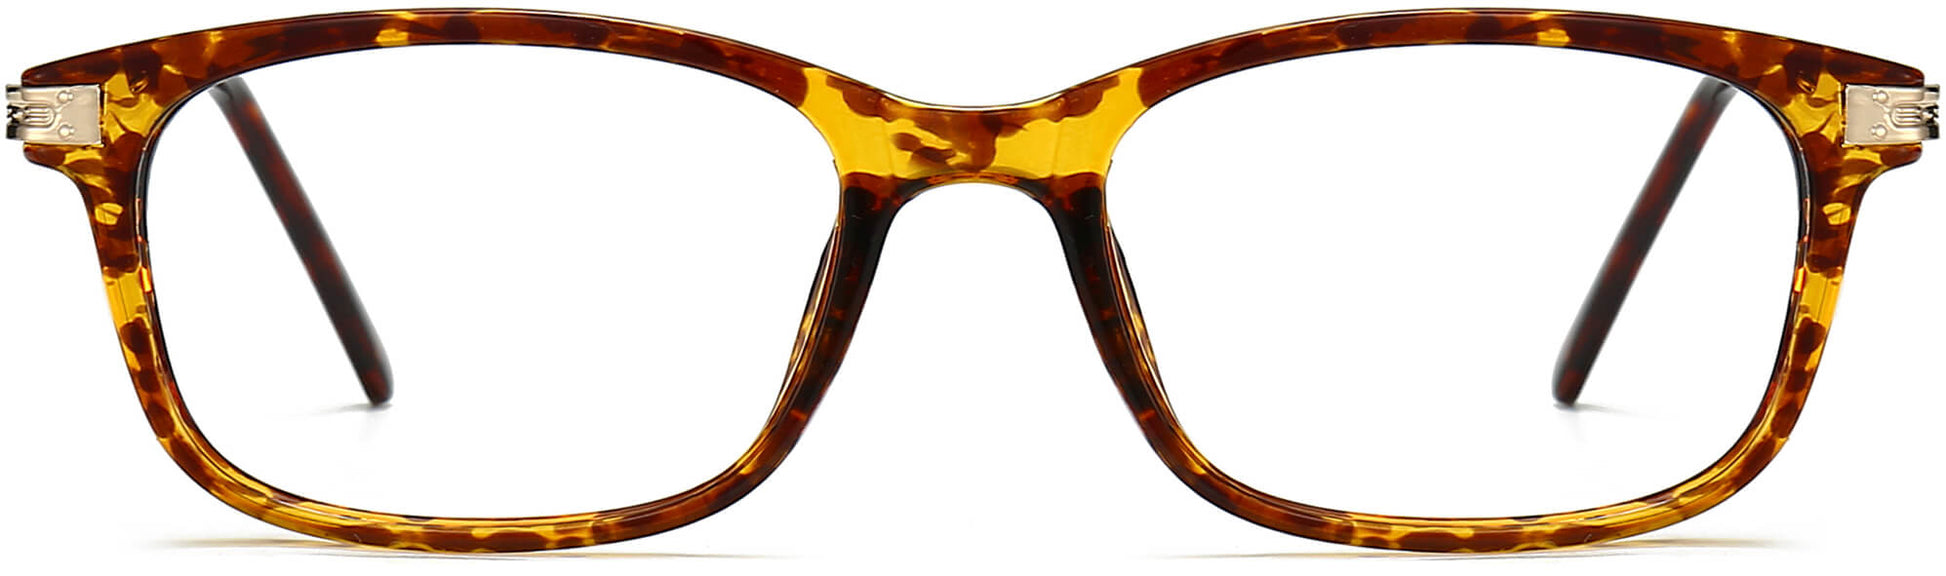 Remington Rectangle Tortoise Eyeglasses from ANRRI, front view